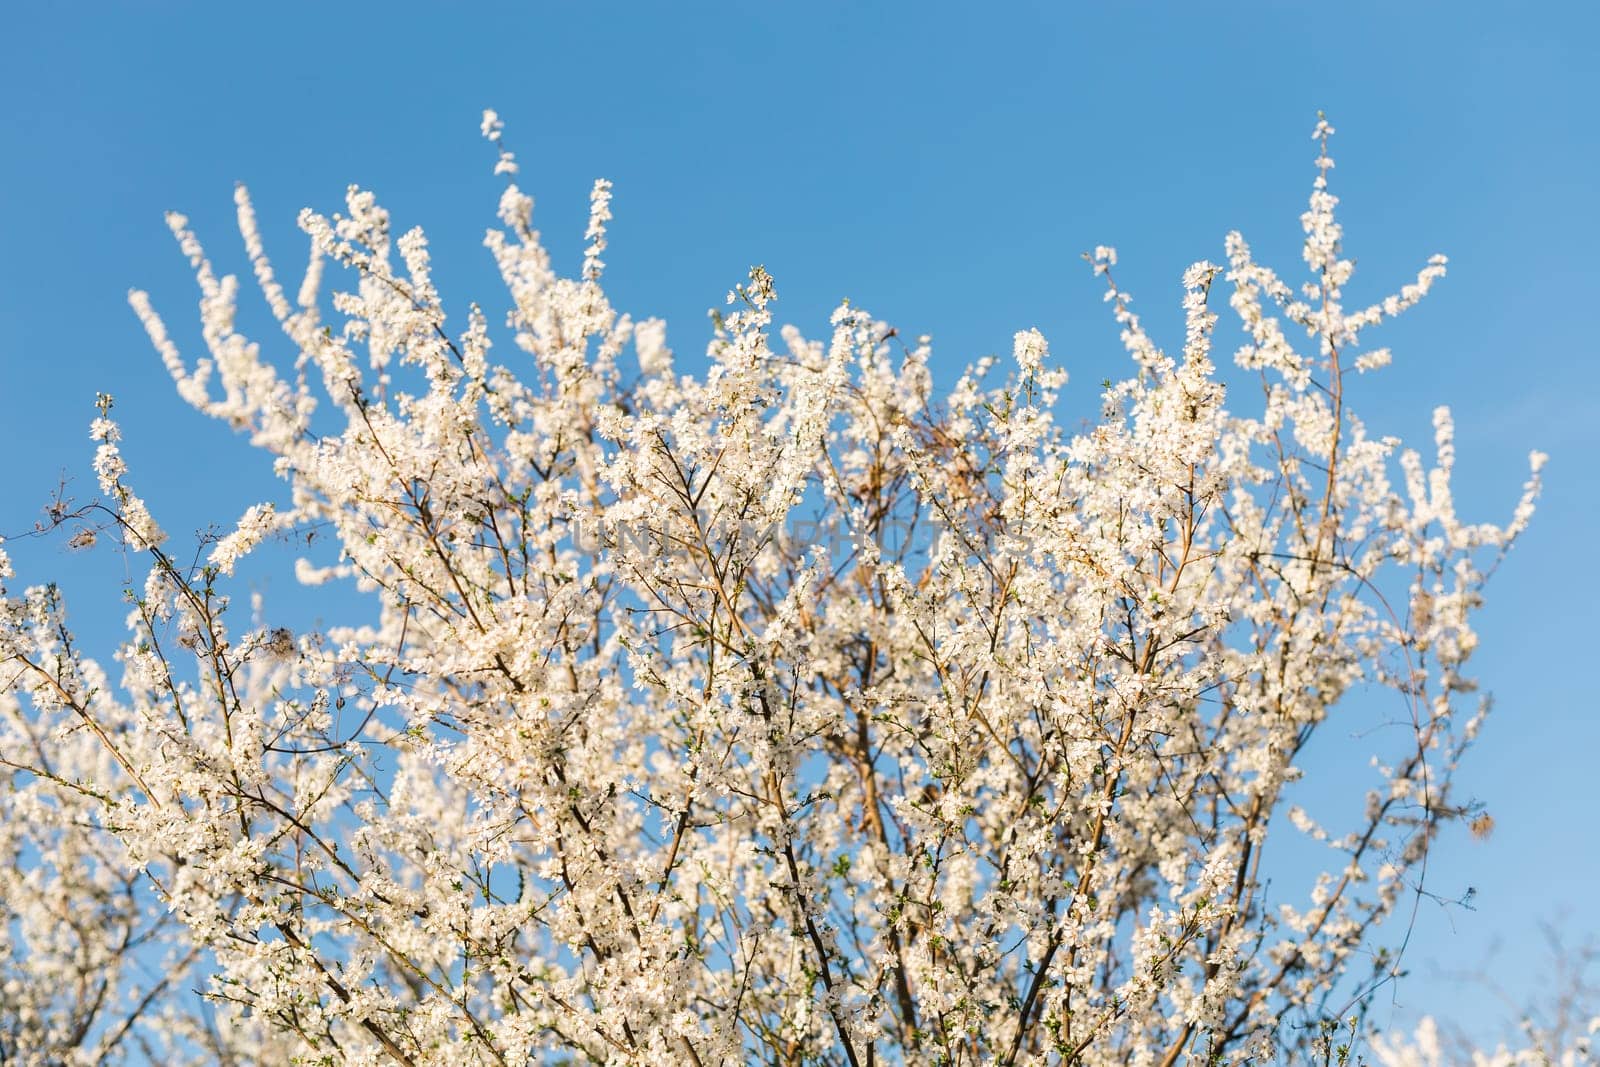 Cherry and apple blooming garden against clear blue sky. Spring flowering by Satura86